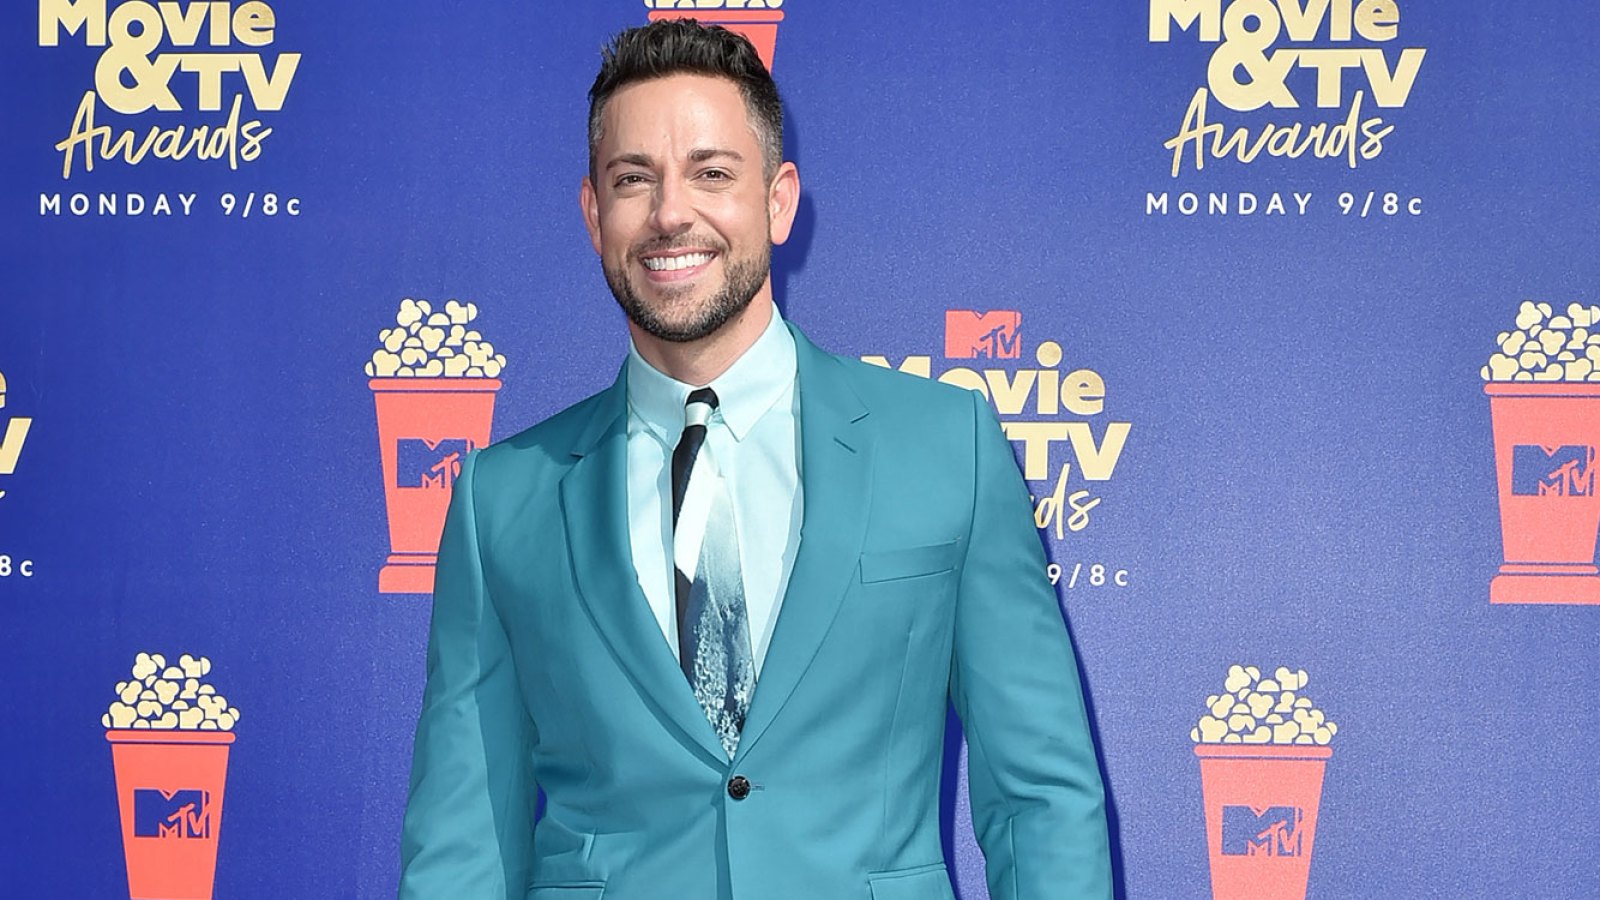 Zachary Levi Teal Suit Beard MTV Move and TV Awards 2019